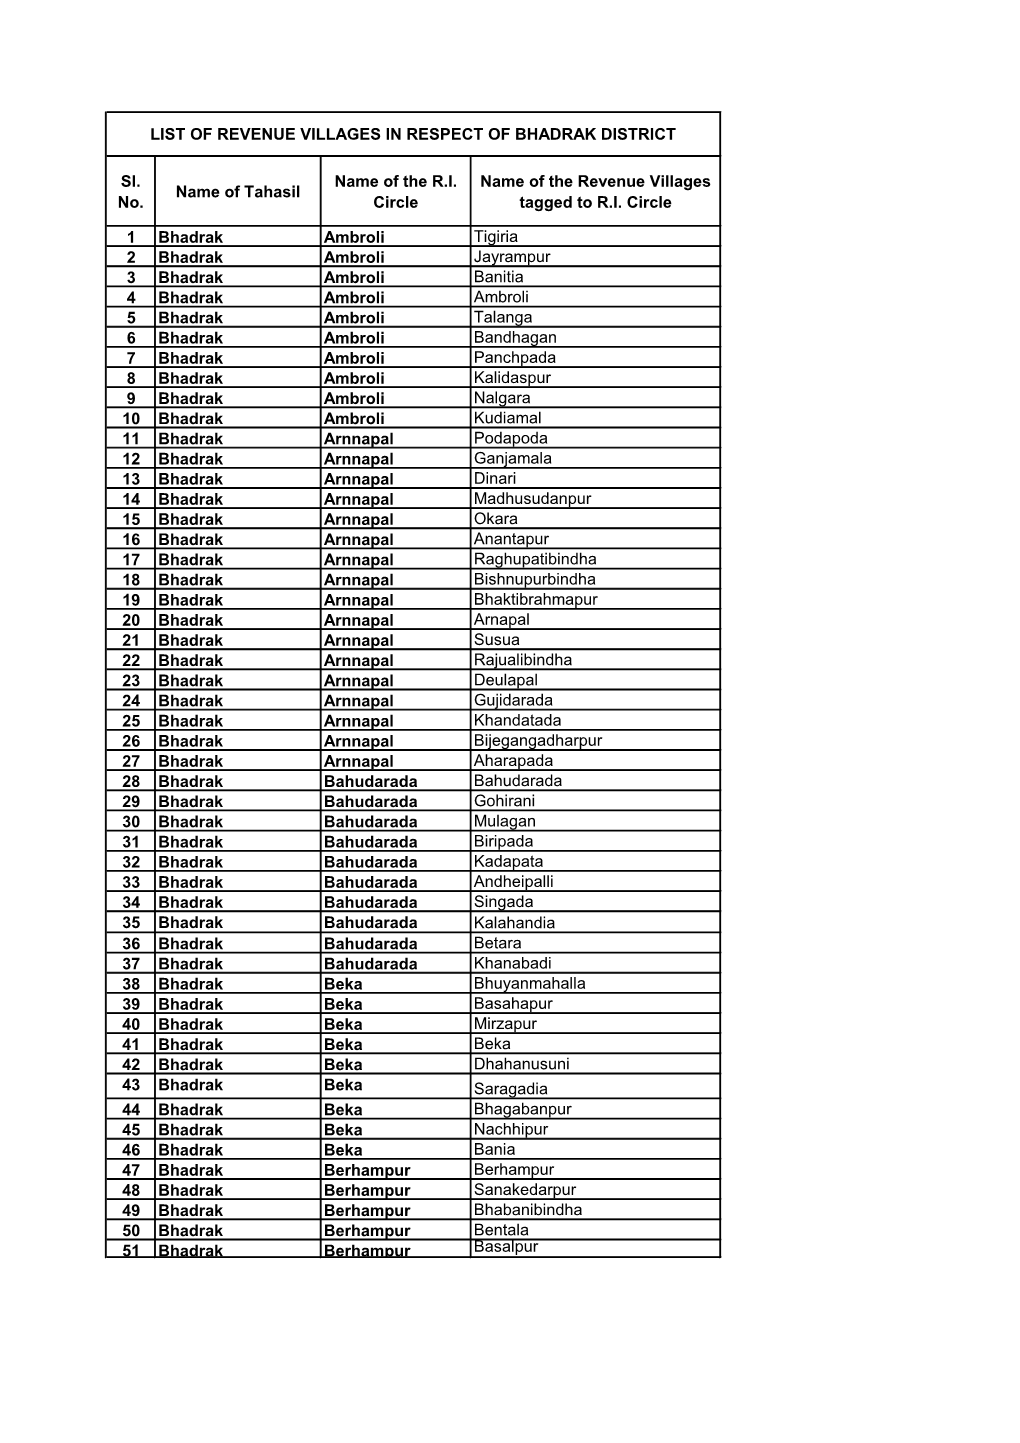 List of Revenue Villages in Respect of Bhadrak District